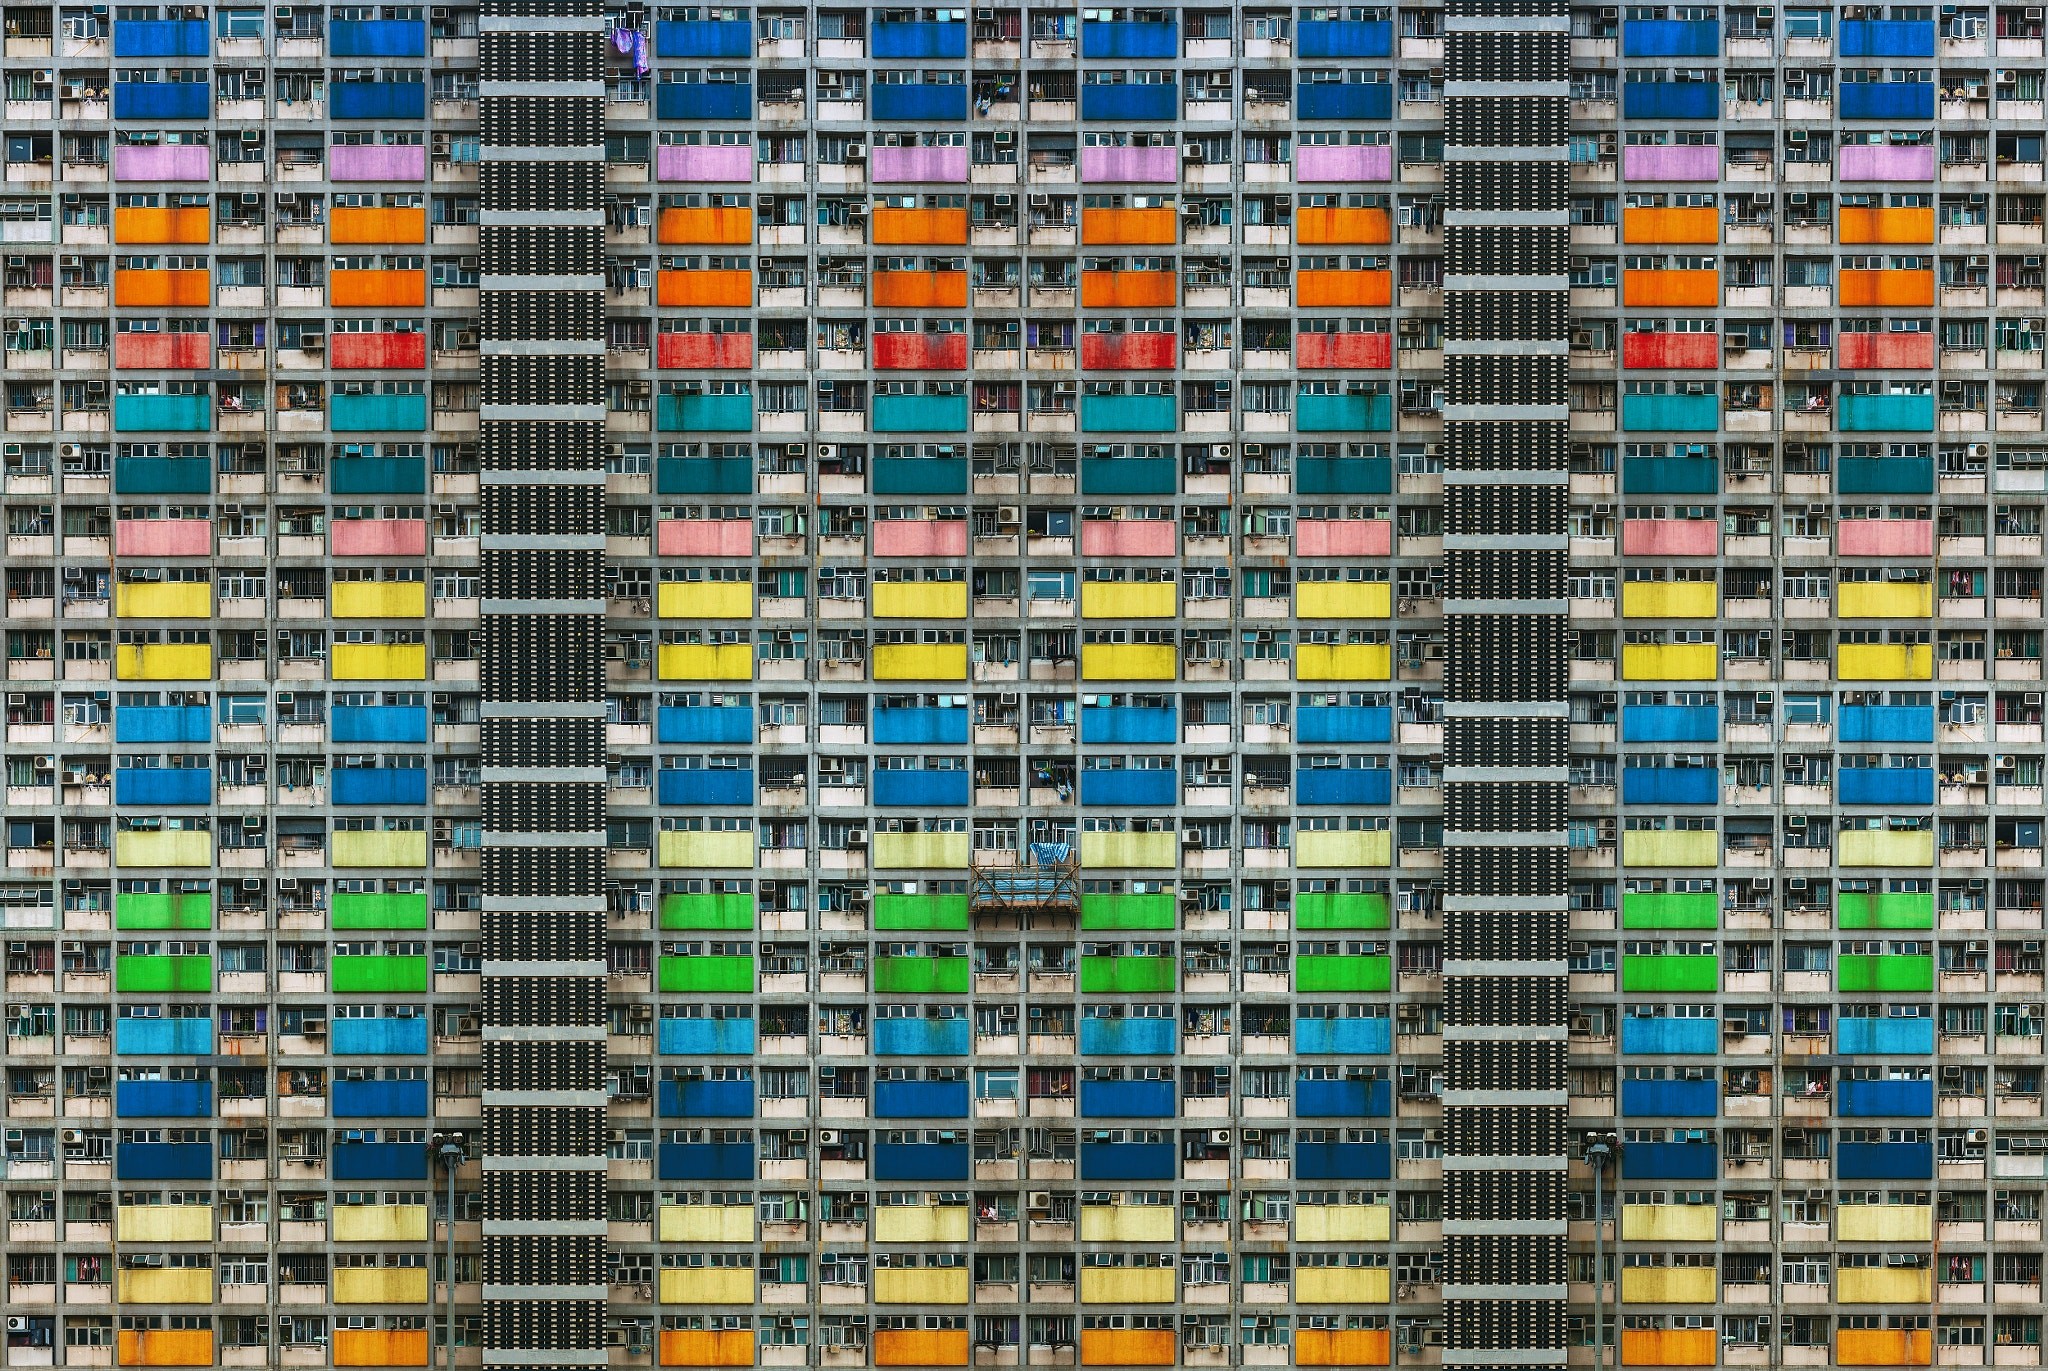 Apartments Cityscape Hong Kong Stacked Colorful 2048x1371